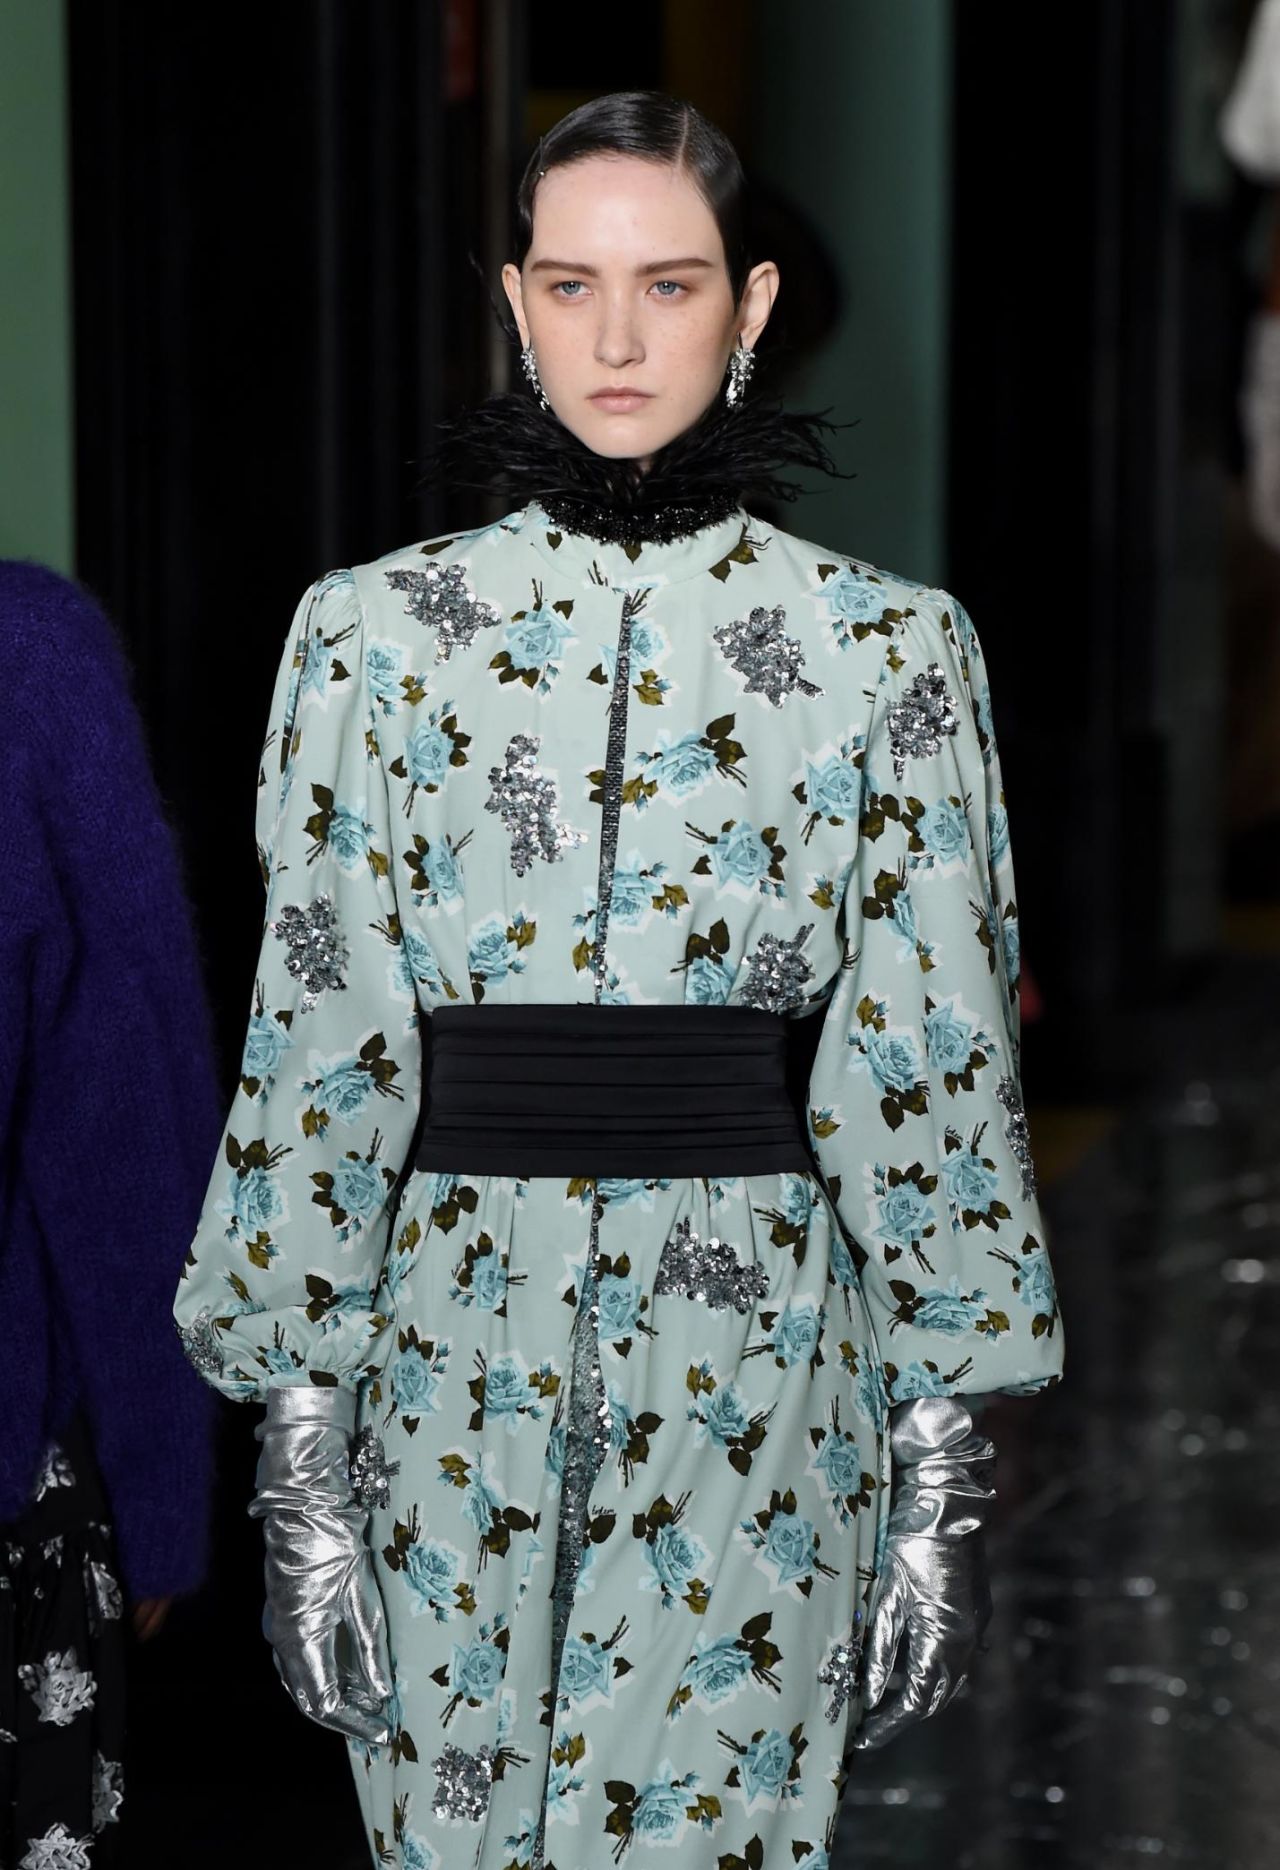 A look from the Erdem show at London Fashion Week in February.